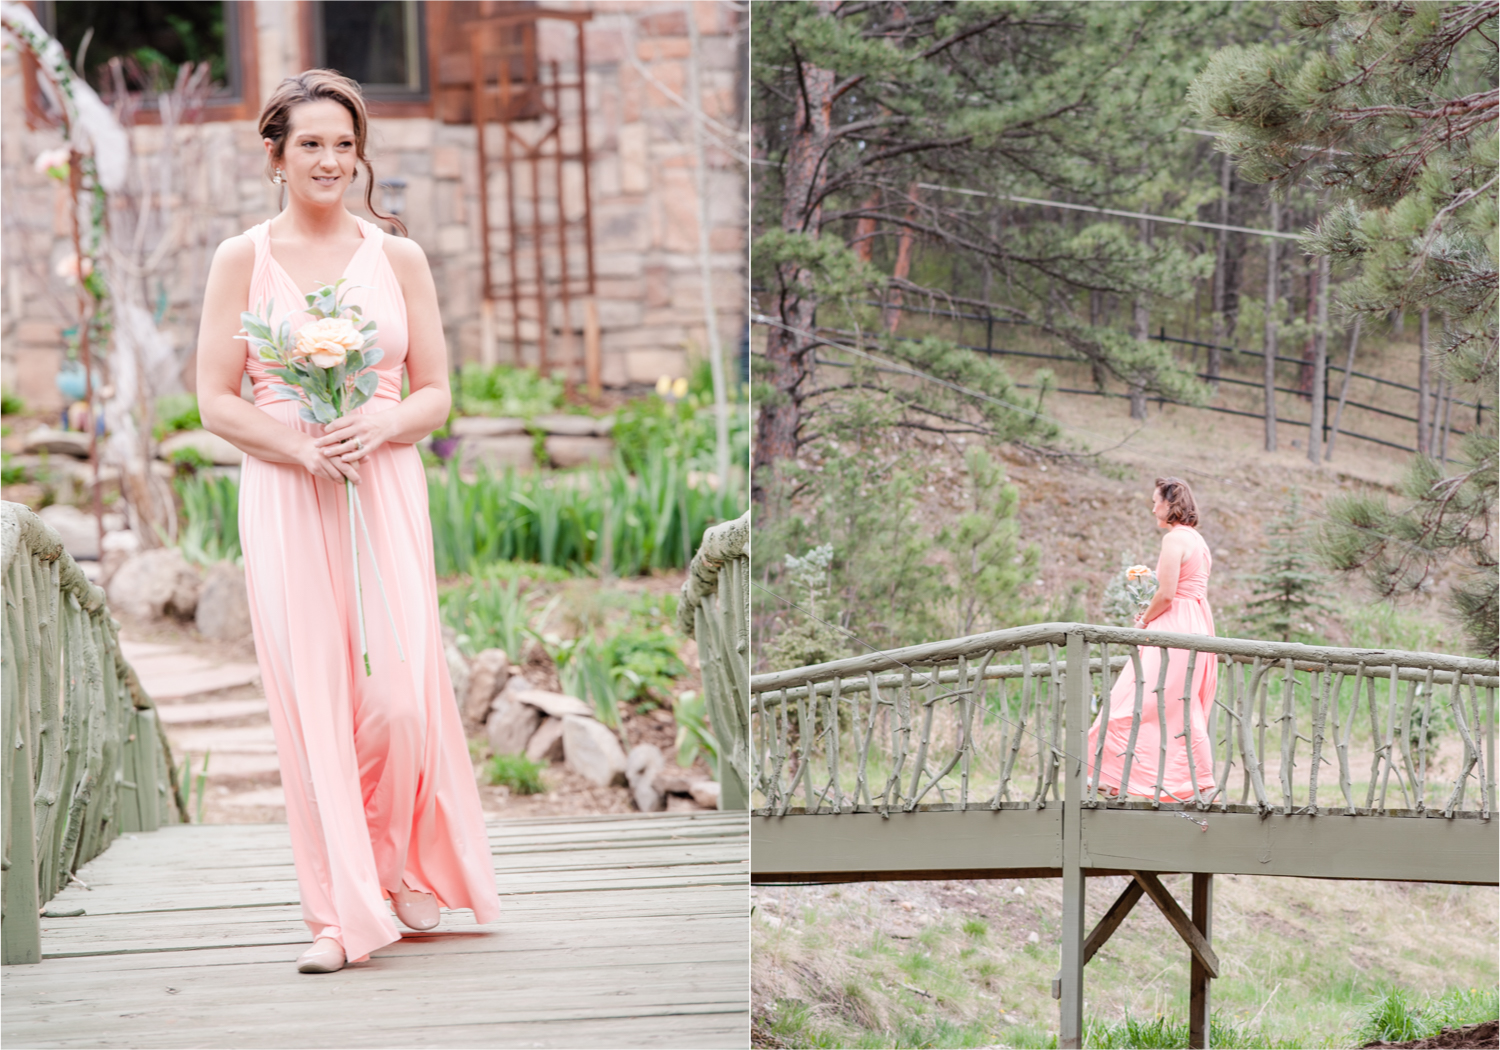 Rustic Rocky Mountain Wedding in Loveland Colorado | Britni Girard Photography | Romantic Morning Brunch Wedding with big surprises for guests | Rain and Shine